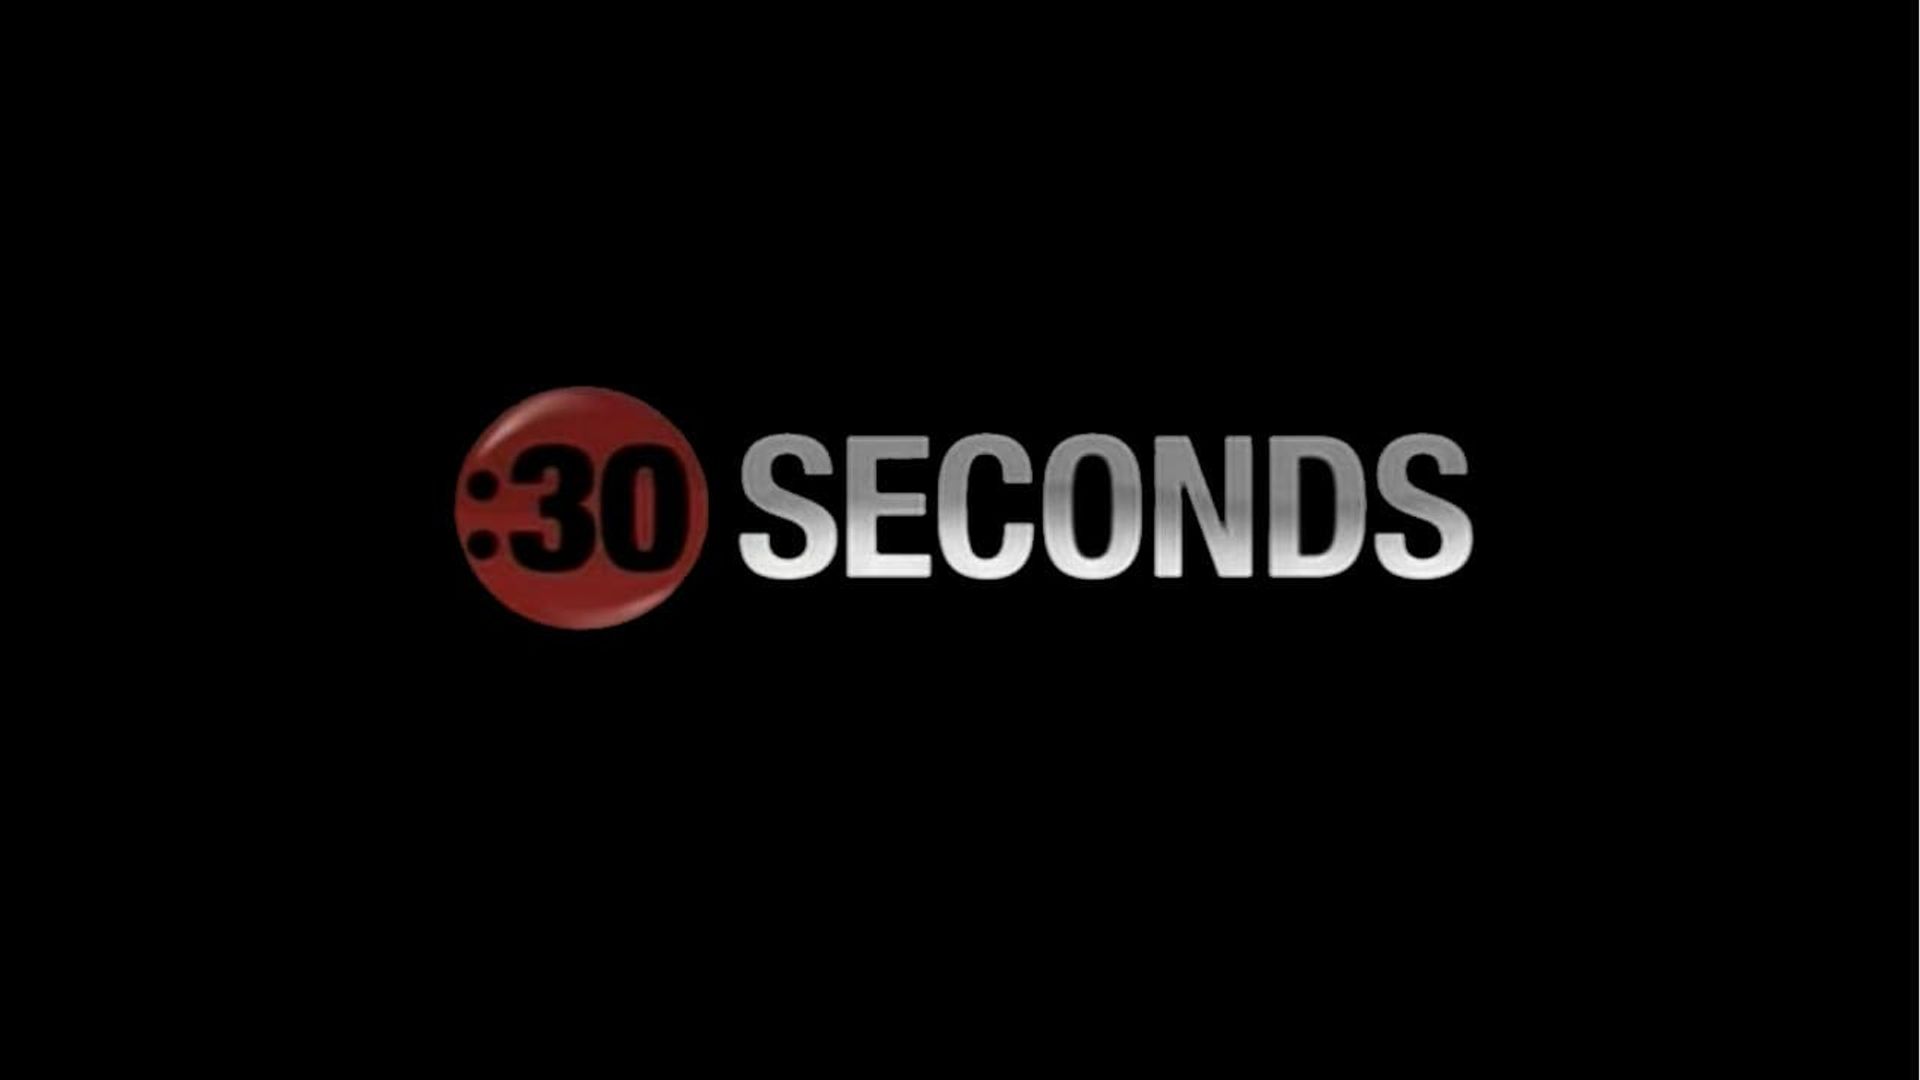 :30 Seconds background